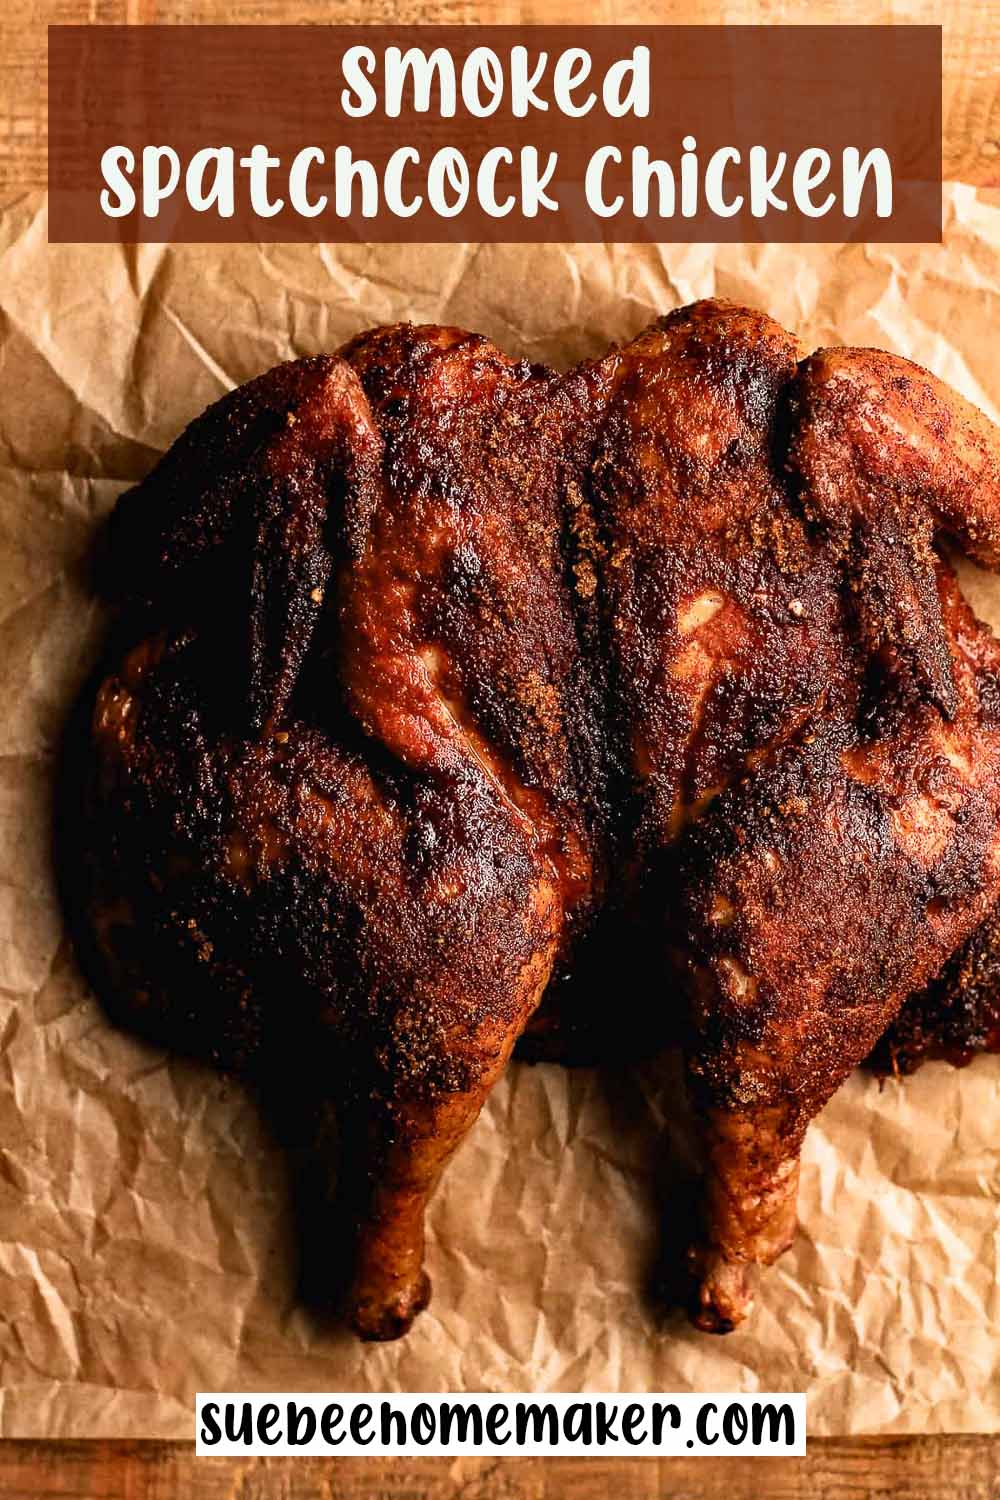 A smoked spatchcock chicken on a board.